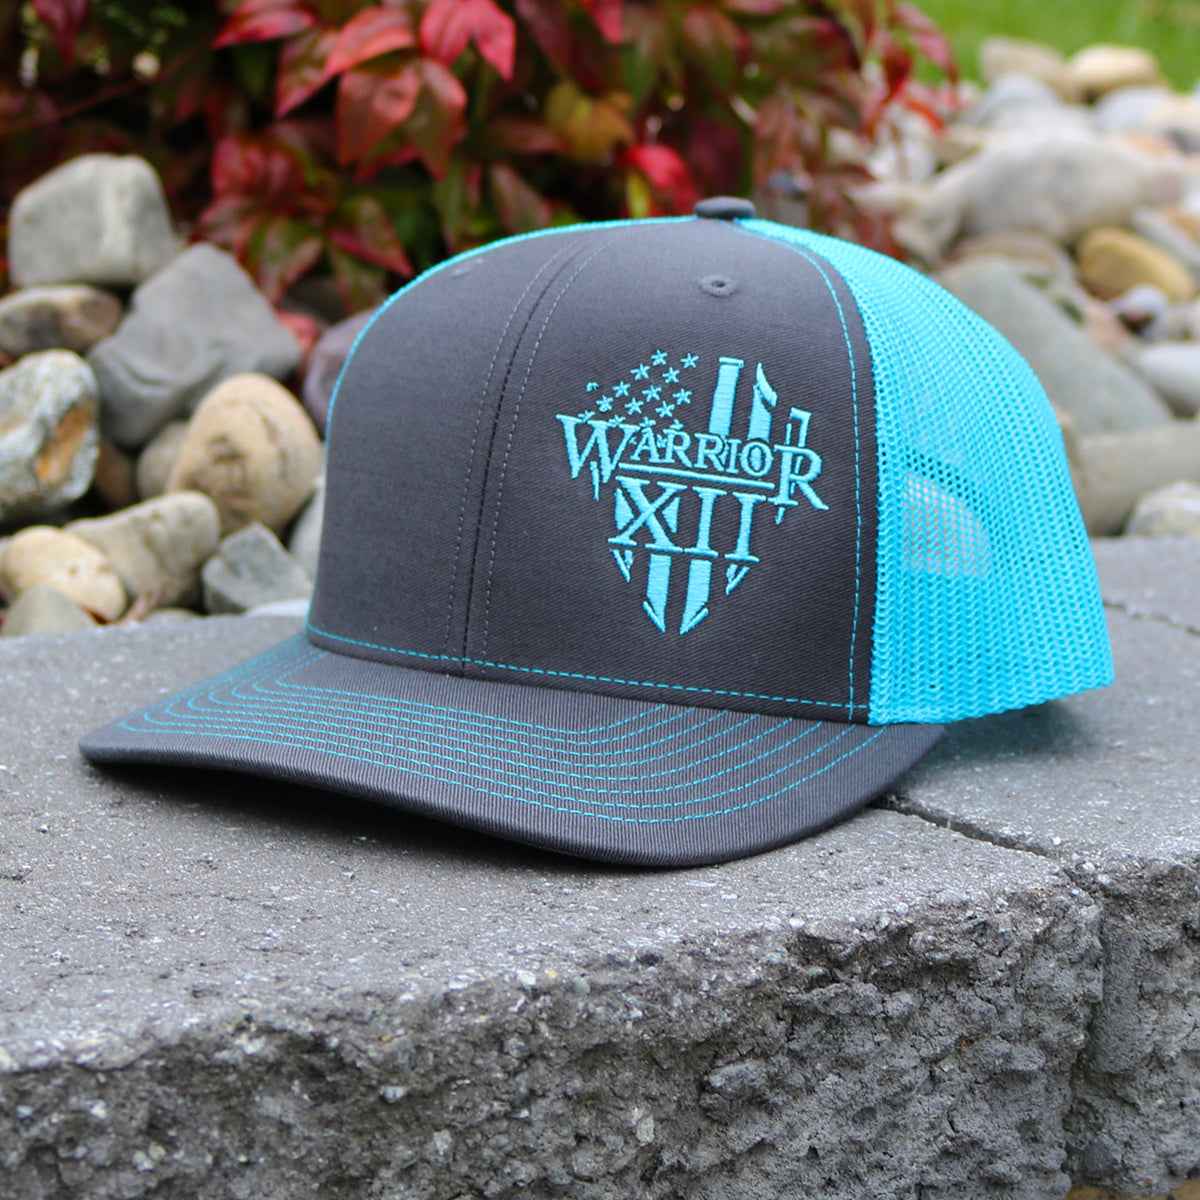 The Warrior Snapback Hat Charcoal/Neon Blue